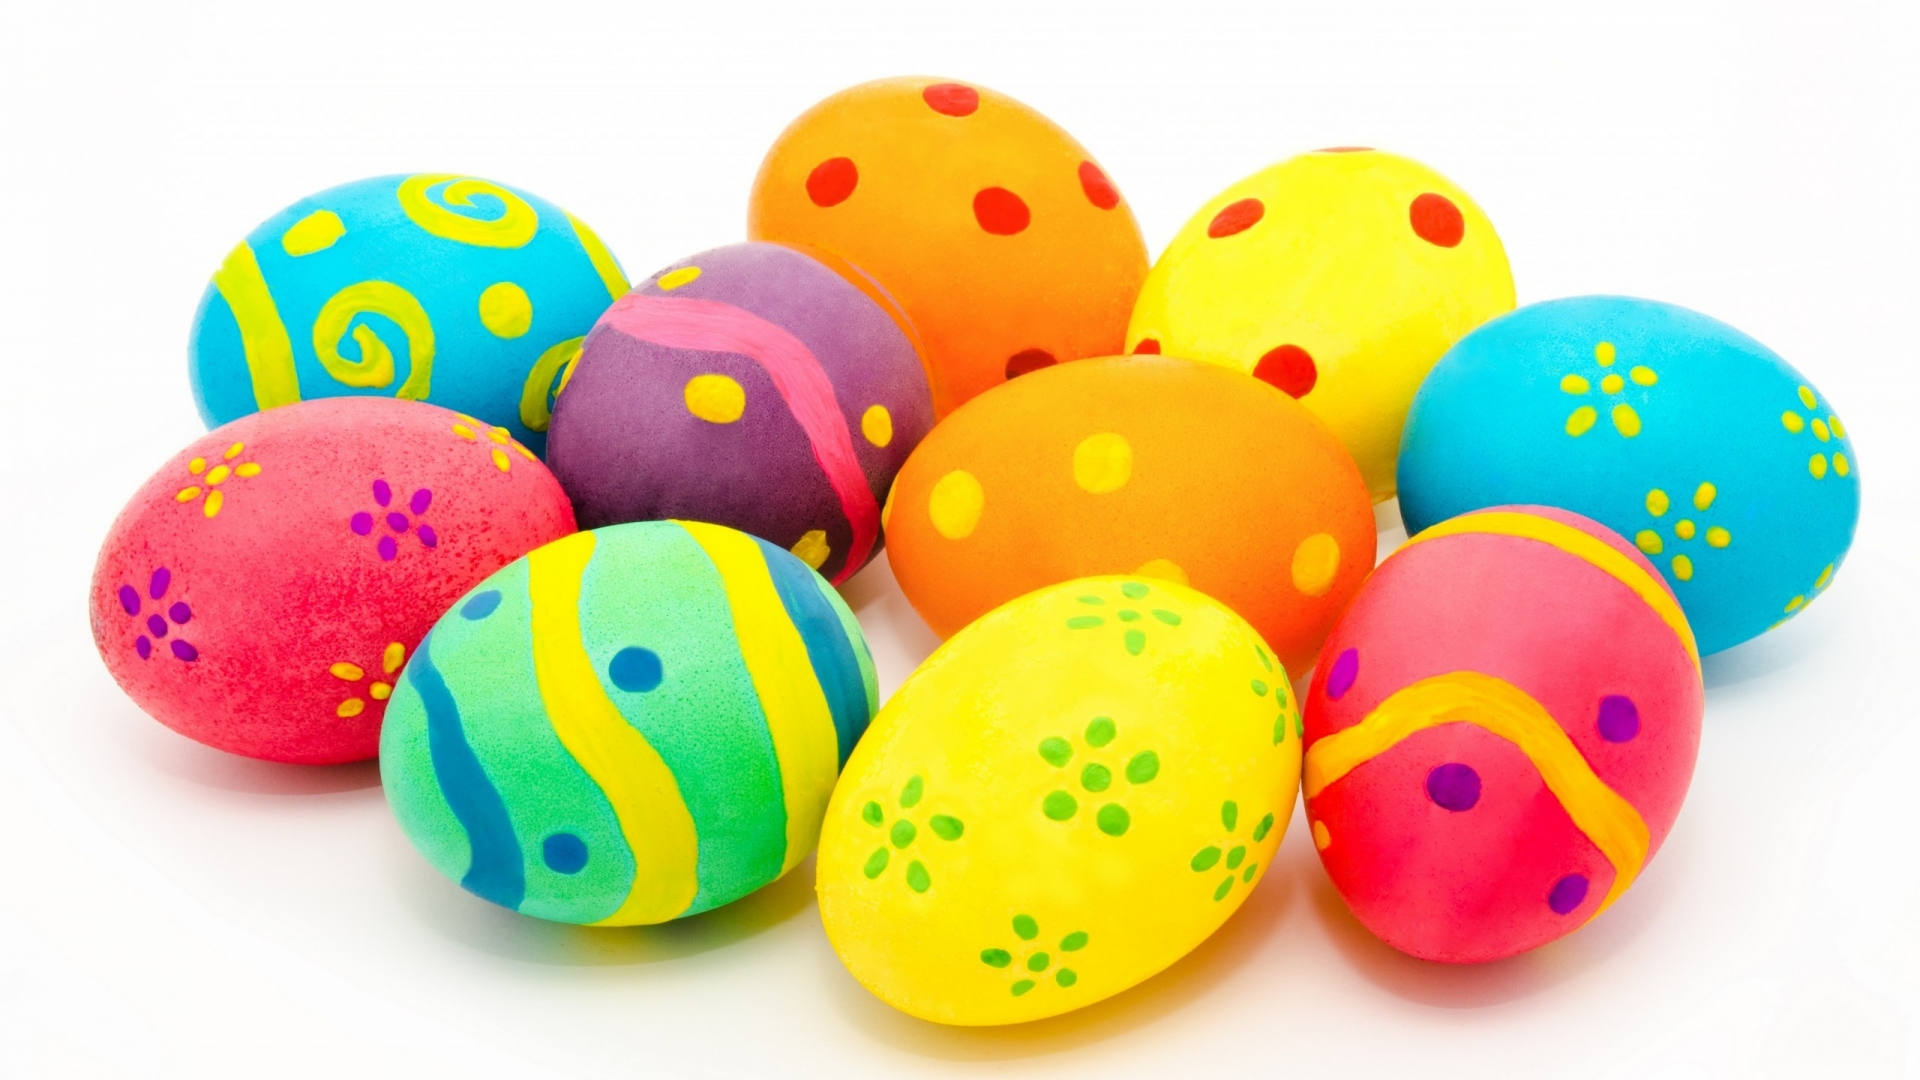 Many Colorful Easter Eggs for 1920 x 1080 HDTV 1080p resolution